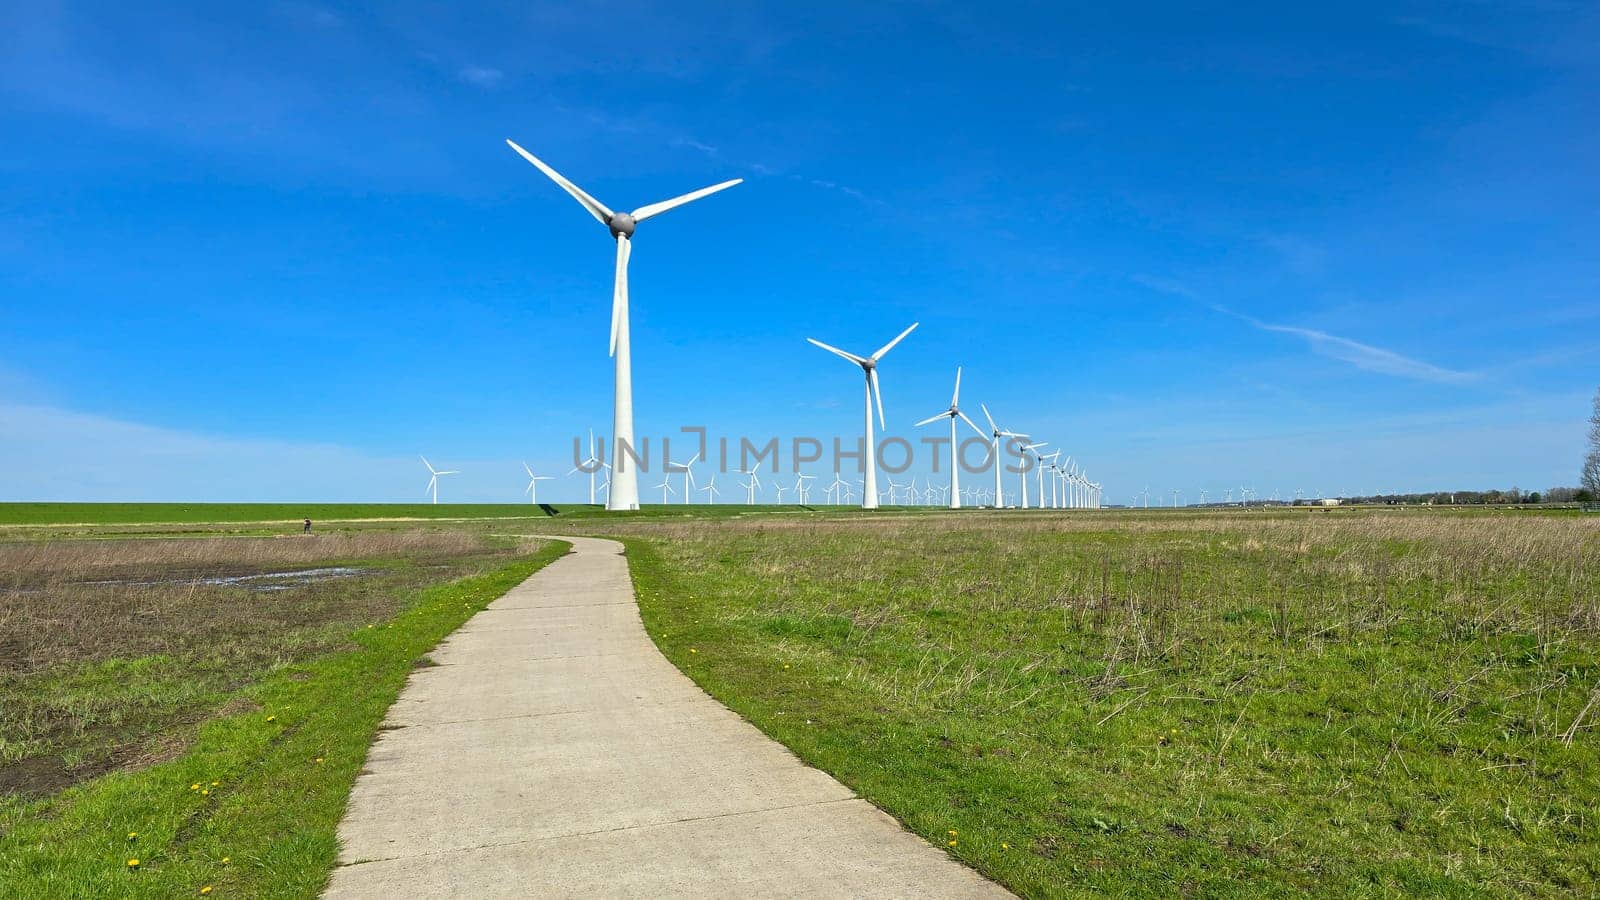 Windmill park in the ocean, drone aerial view of windmill turbines at sea in the Netherlands by fokkebok